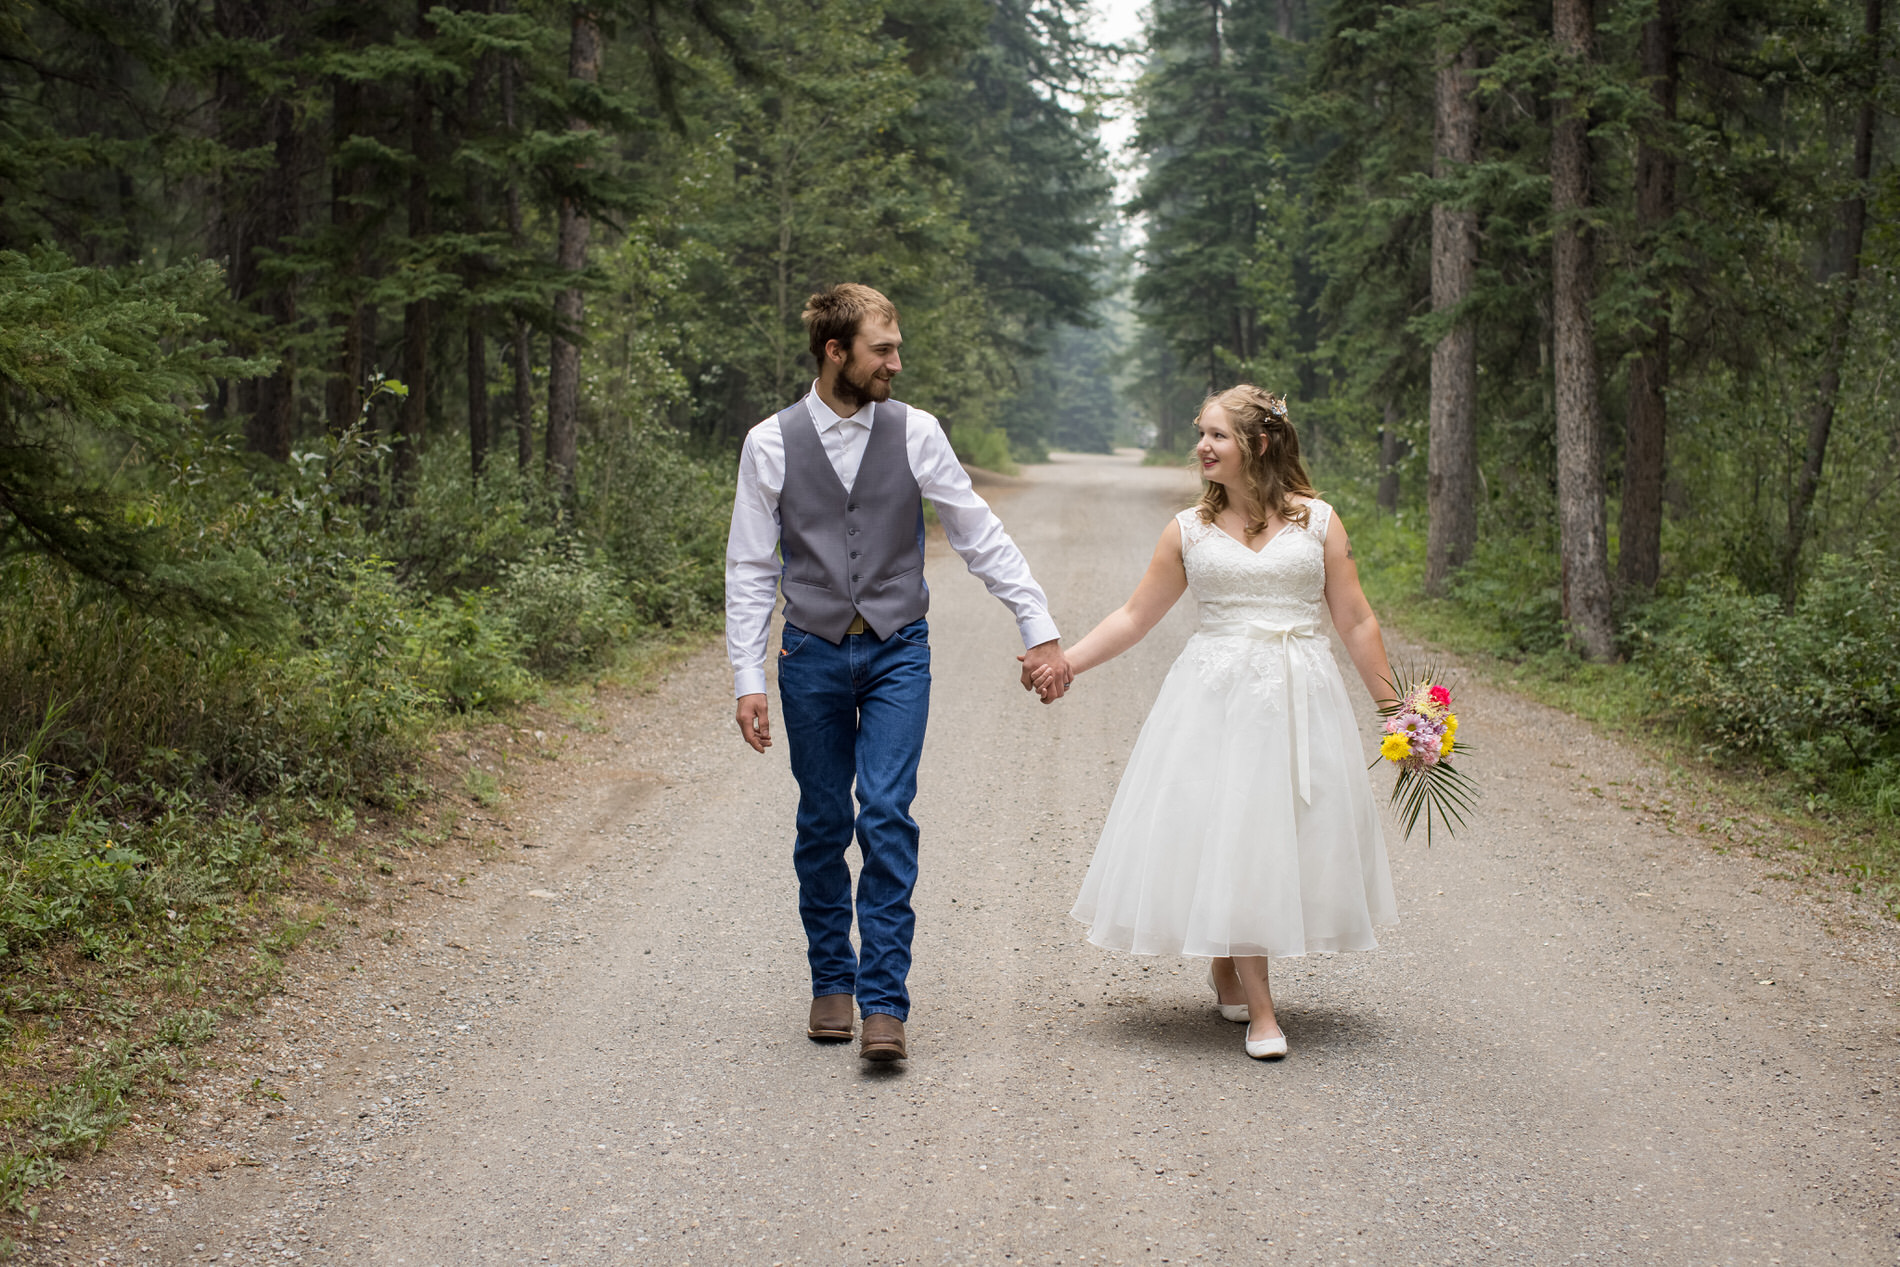 Bride and groom get married at a campground in banff National Park. They eloped with a small group of family and friends with an outdoor ceremony